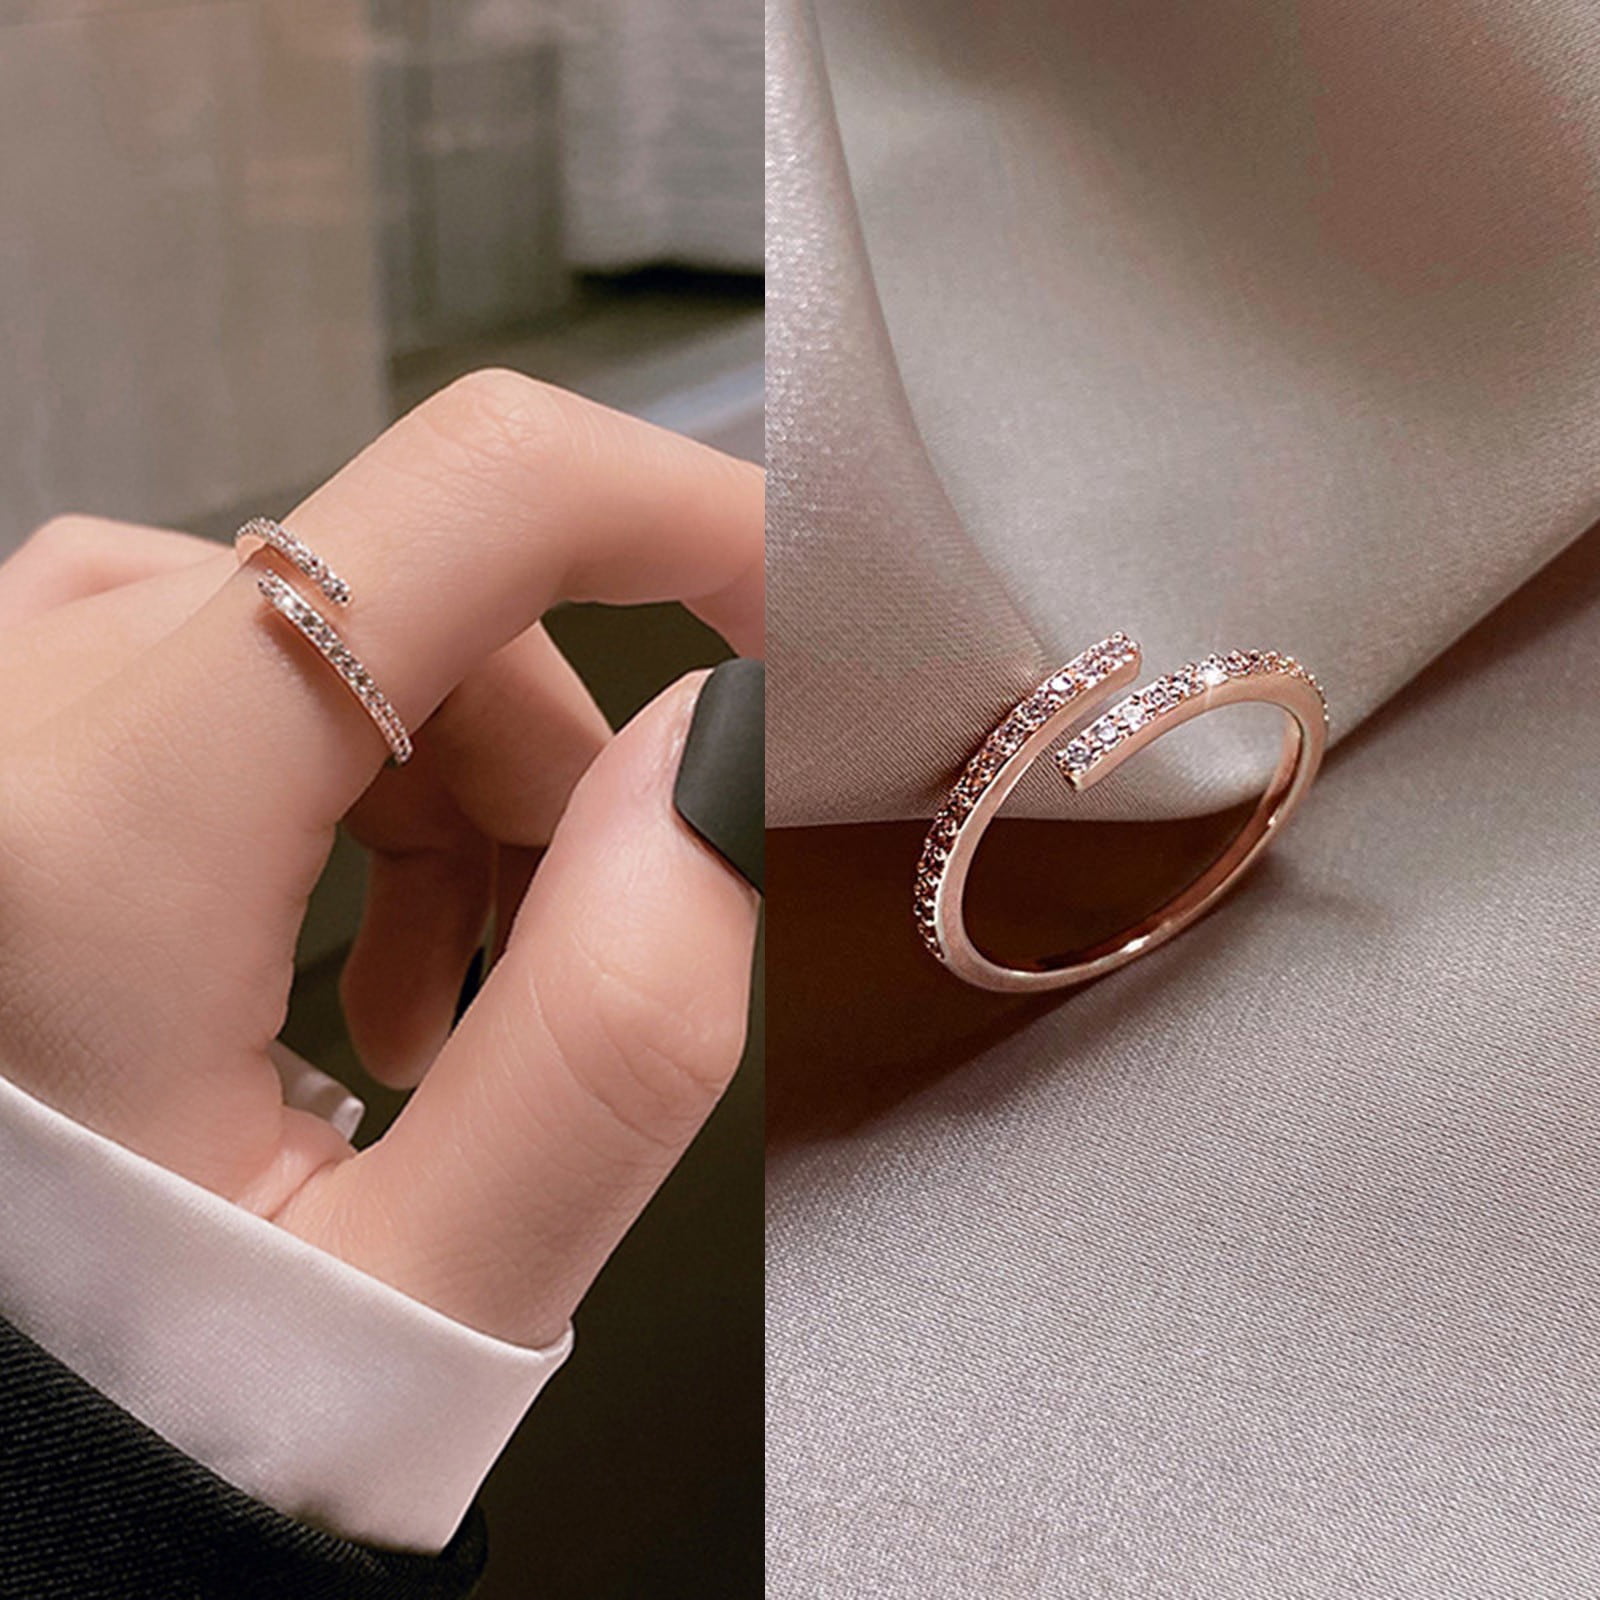 XIAQUJ Delicate in dex Finger Hug Ring with Ring Small Opening Adjustable Ring with Irregular Ring Rings Gold c503f920 412f 4aae b502 4c186e6a9bf4.7128834c8291c04cf4487d755b79f4ca